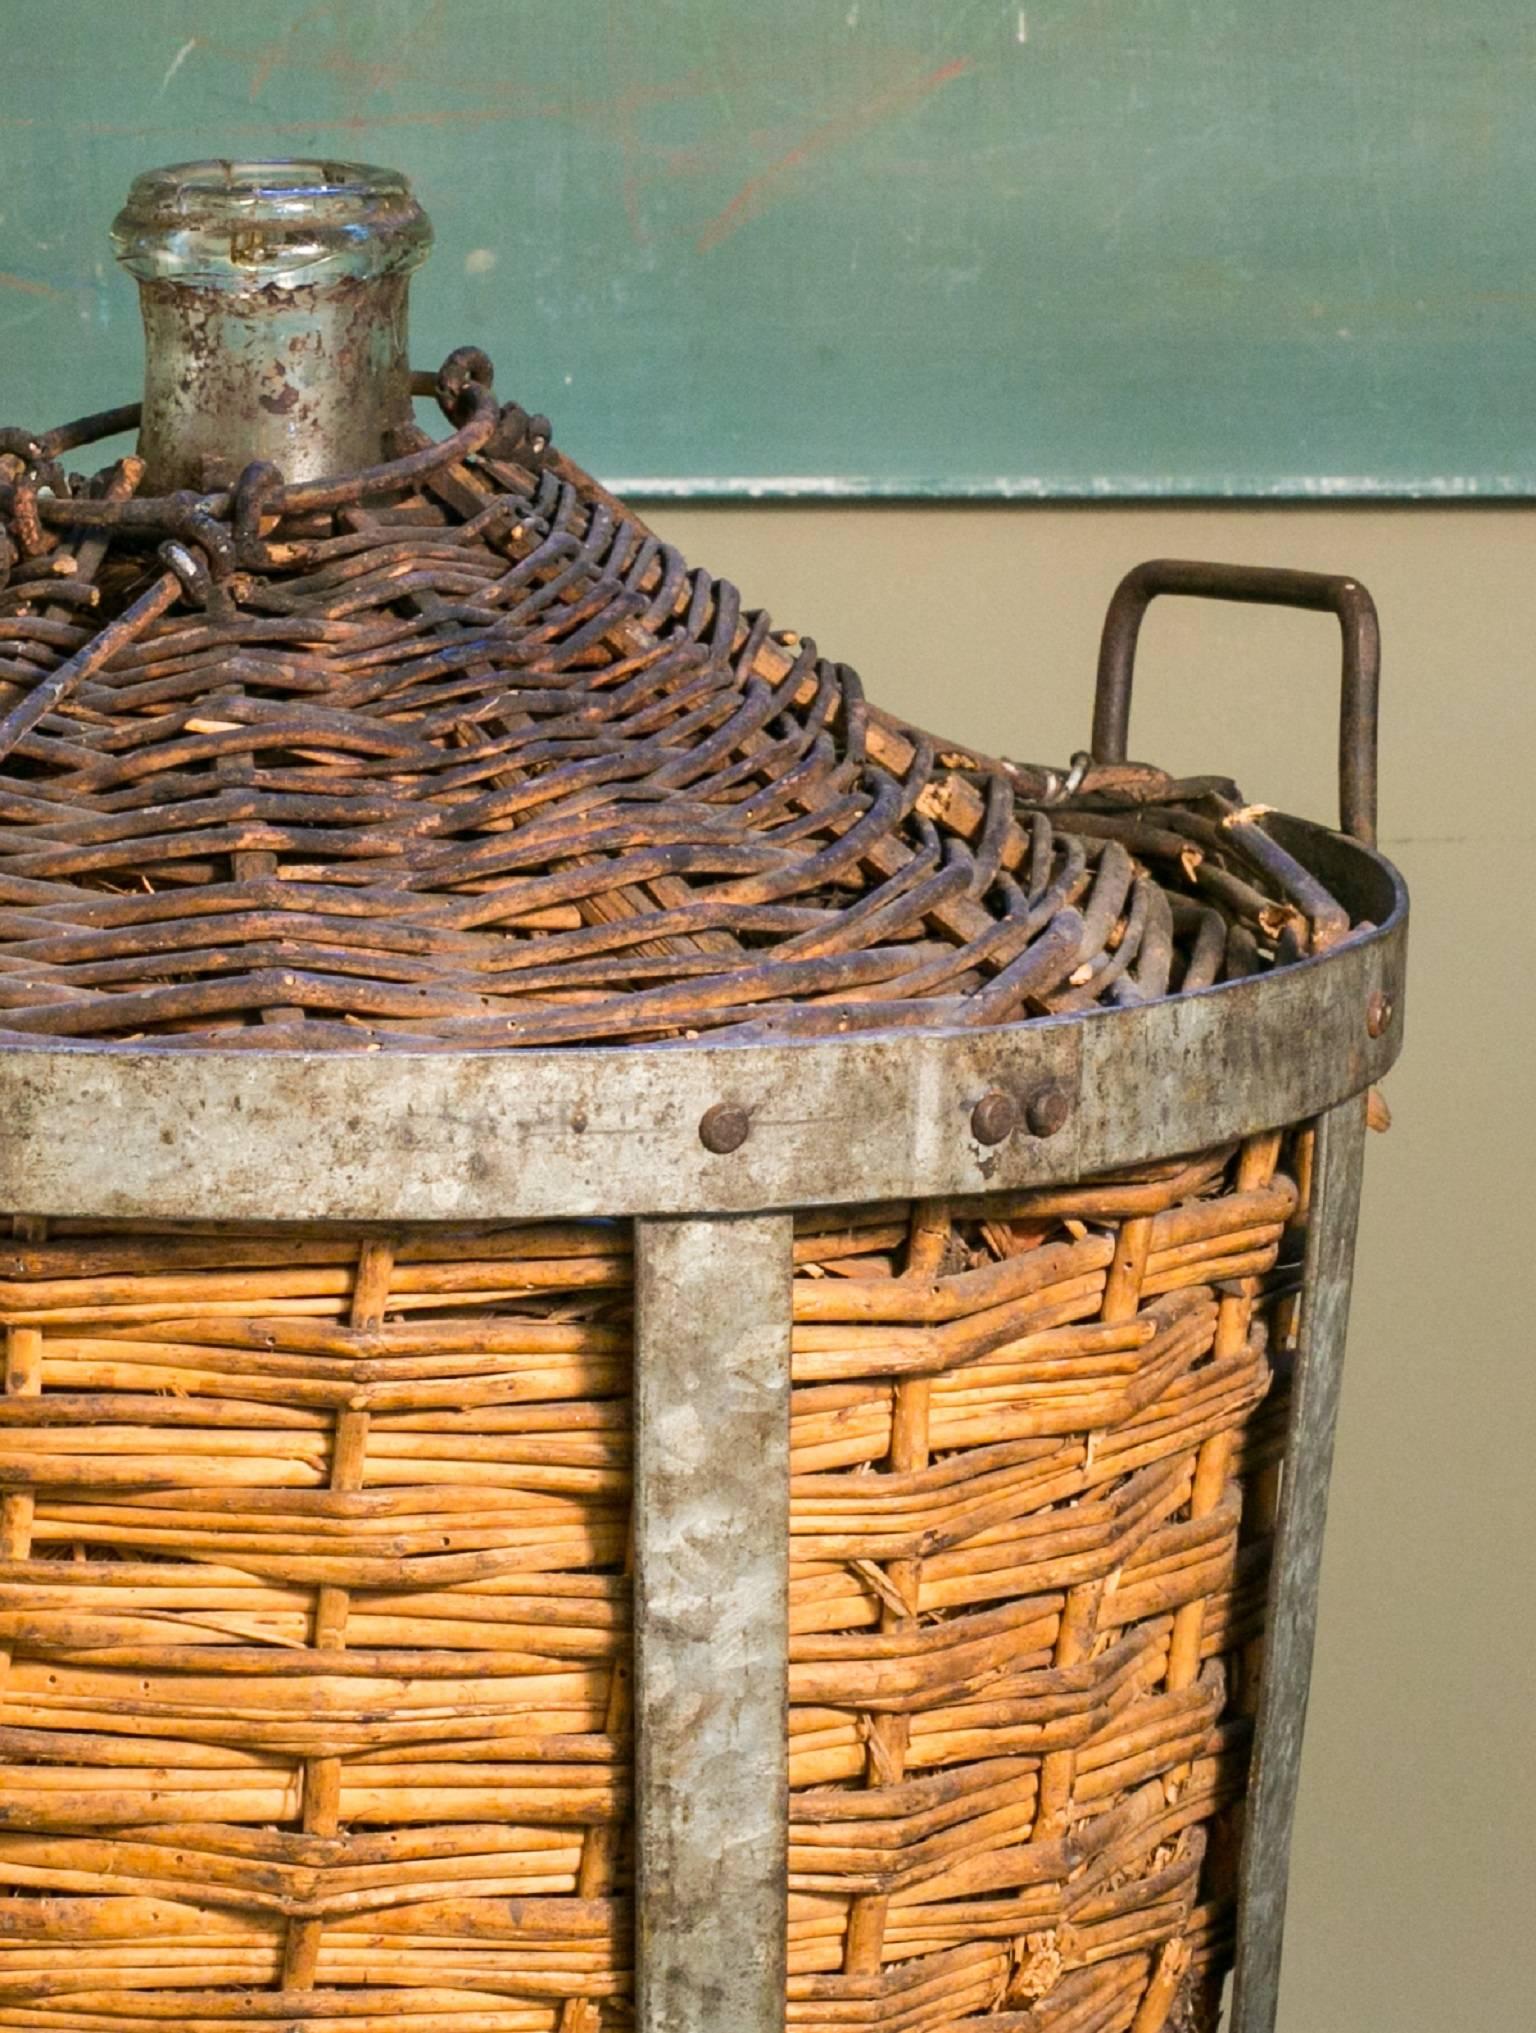 Charming rustic antique bottle in it's original rattan and metal basket. Full of character with a wonderful patina. Would be perfect for a vineyard, wine room or cellar.